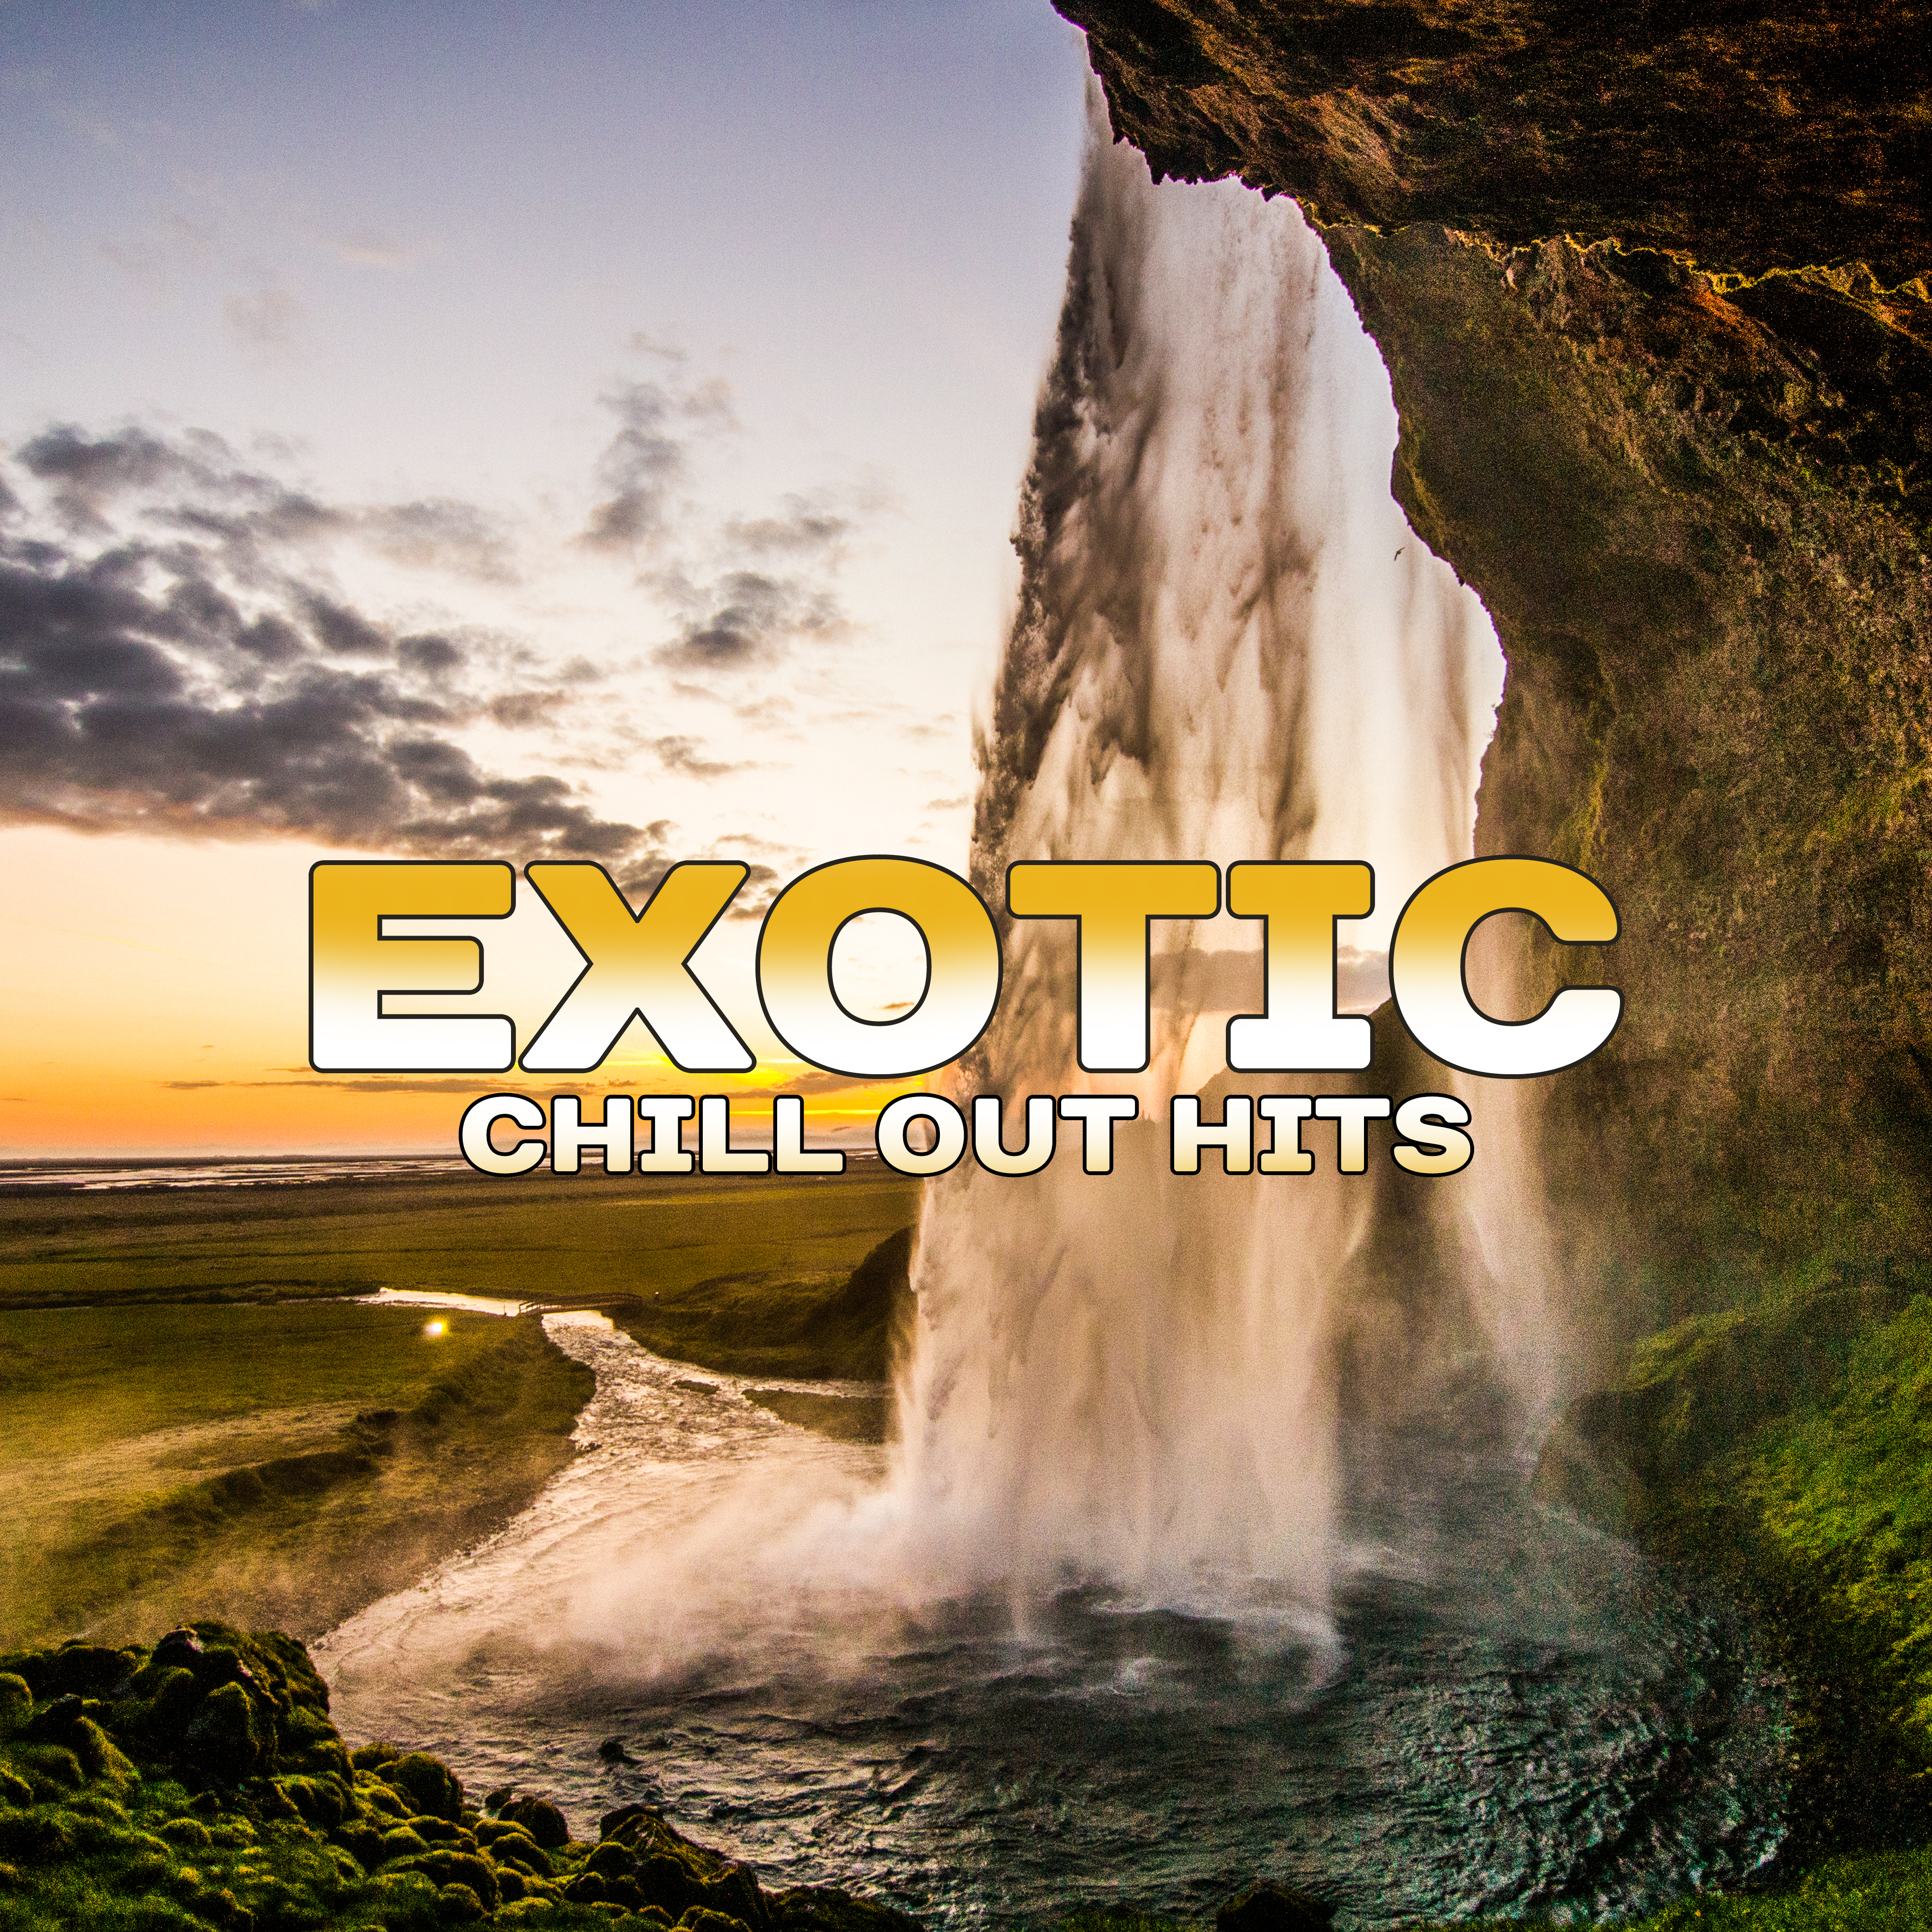 Exotic Chill Out Hits – Chill Out 2017, Relax Lounge, Chill Out Music, Electronic Beats, Todays Hits